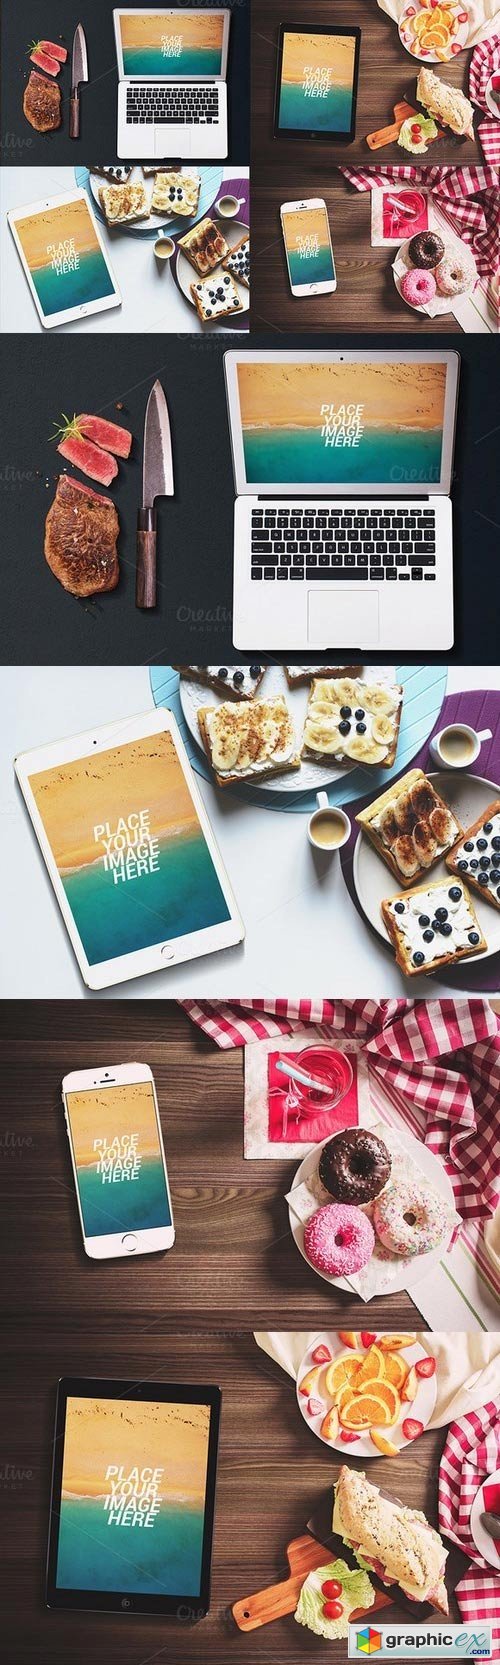 Devices And Food - Mockups